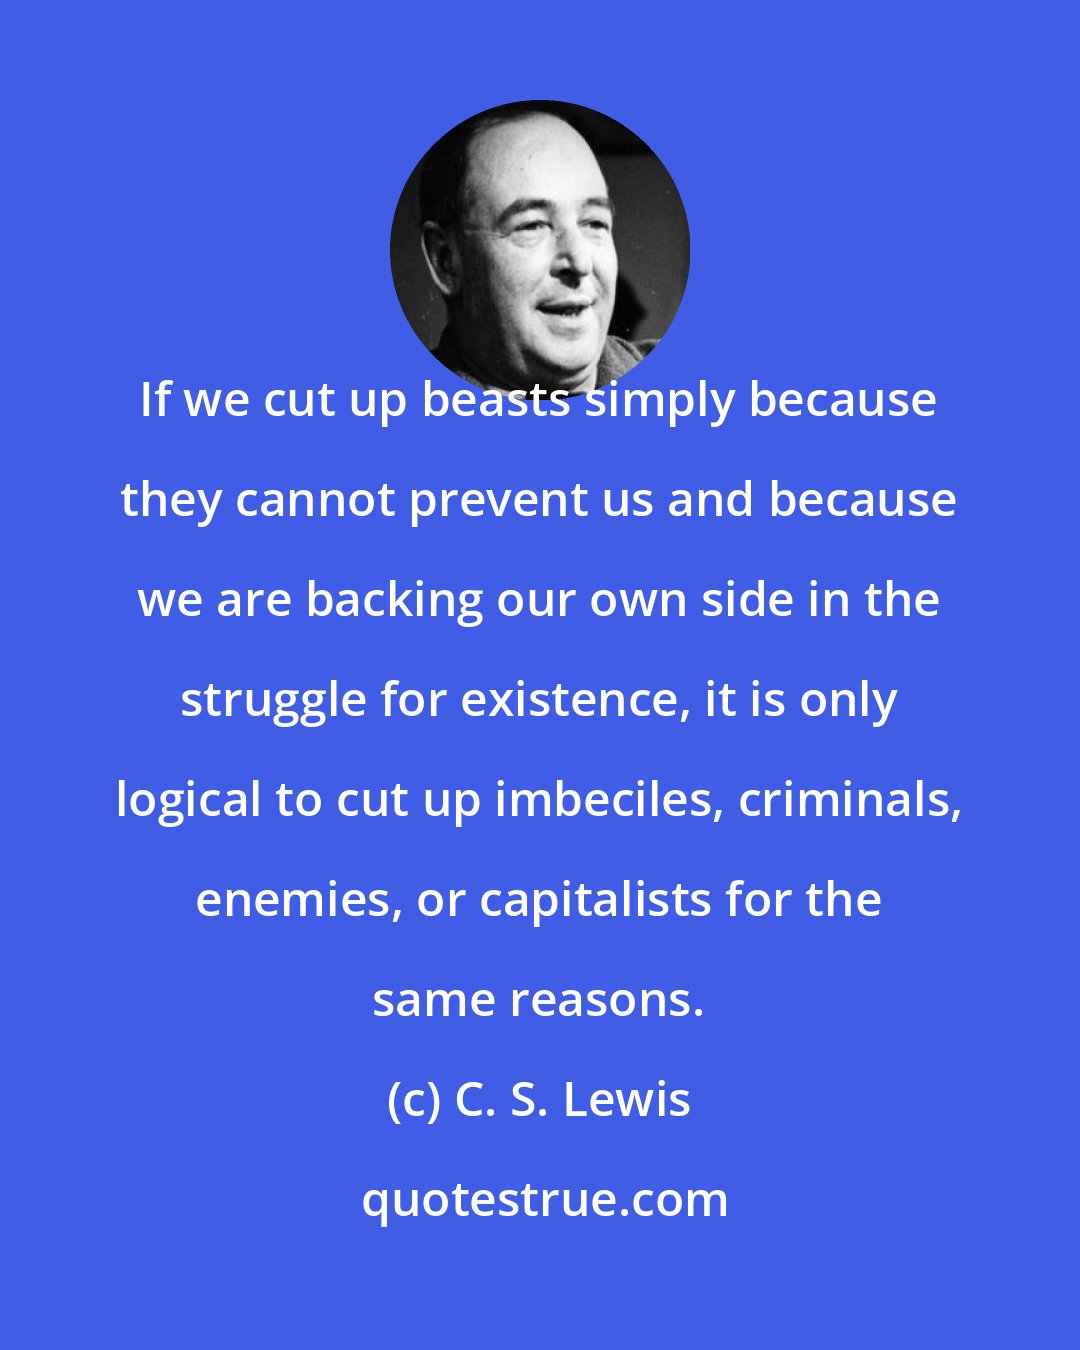 C. S. Lewis: If we cut up beasts simply because they cannot prevent us and because we are backing our own side in the struggle for existence, it is only logical to cut up imbeciles, criminals, enemies, or capitalists for the same reasons.